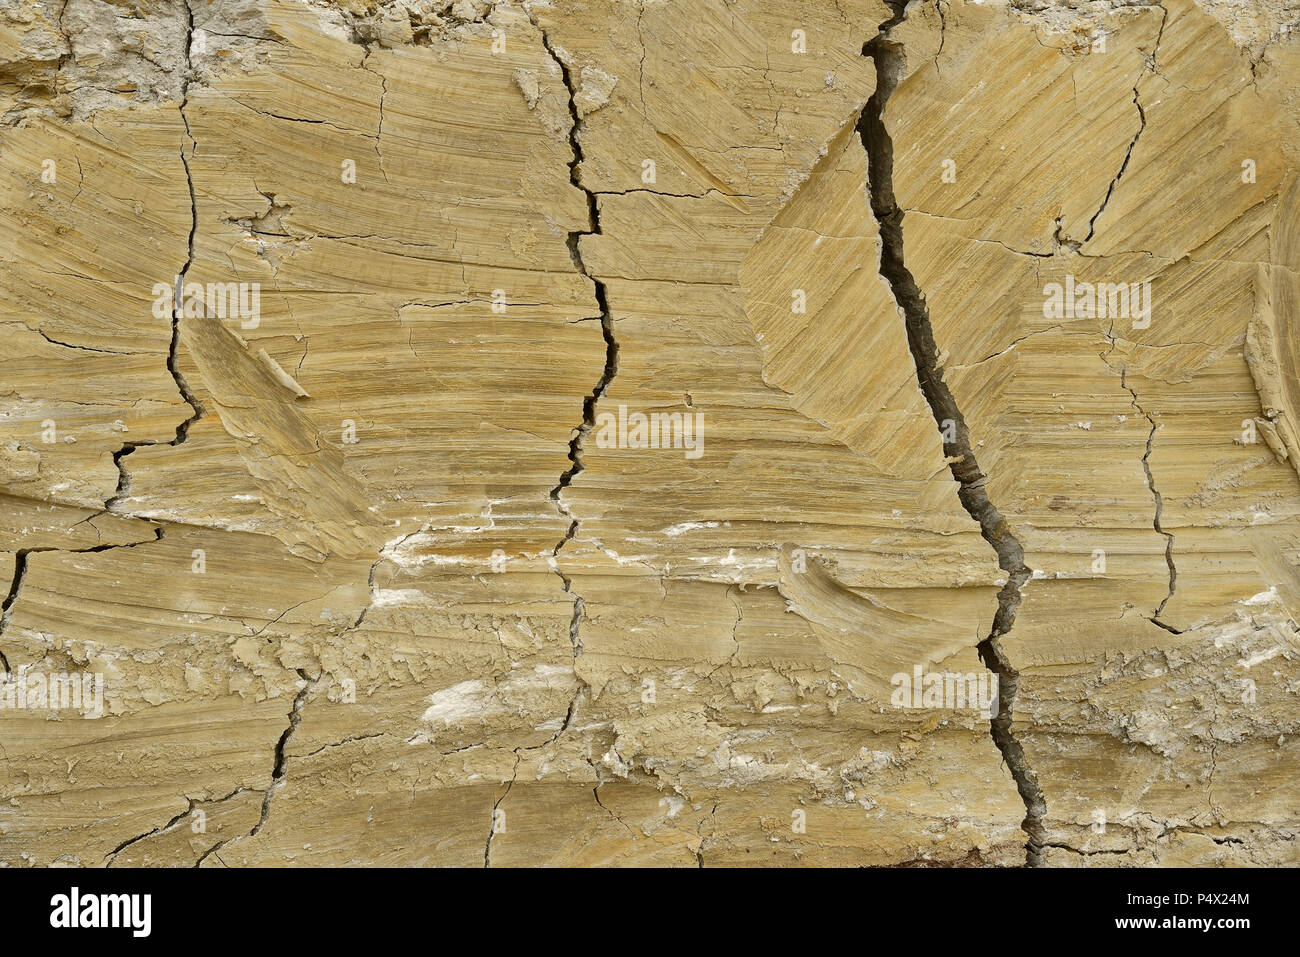 Vertical cross section of Clay soil Stock Photo